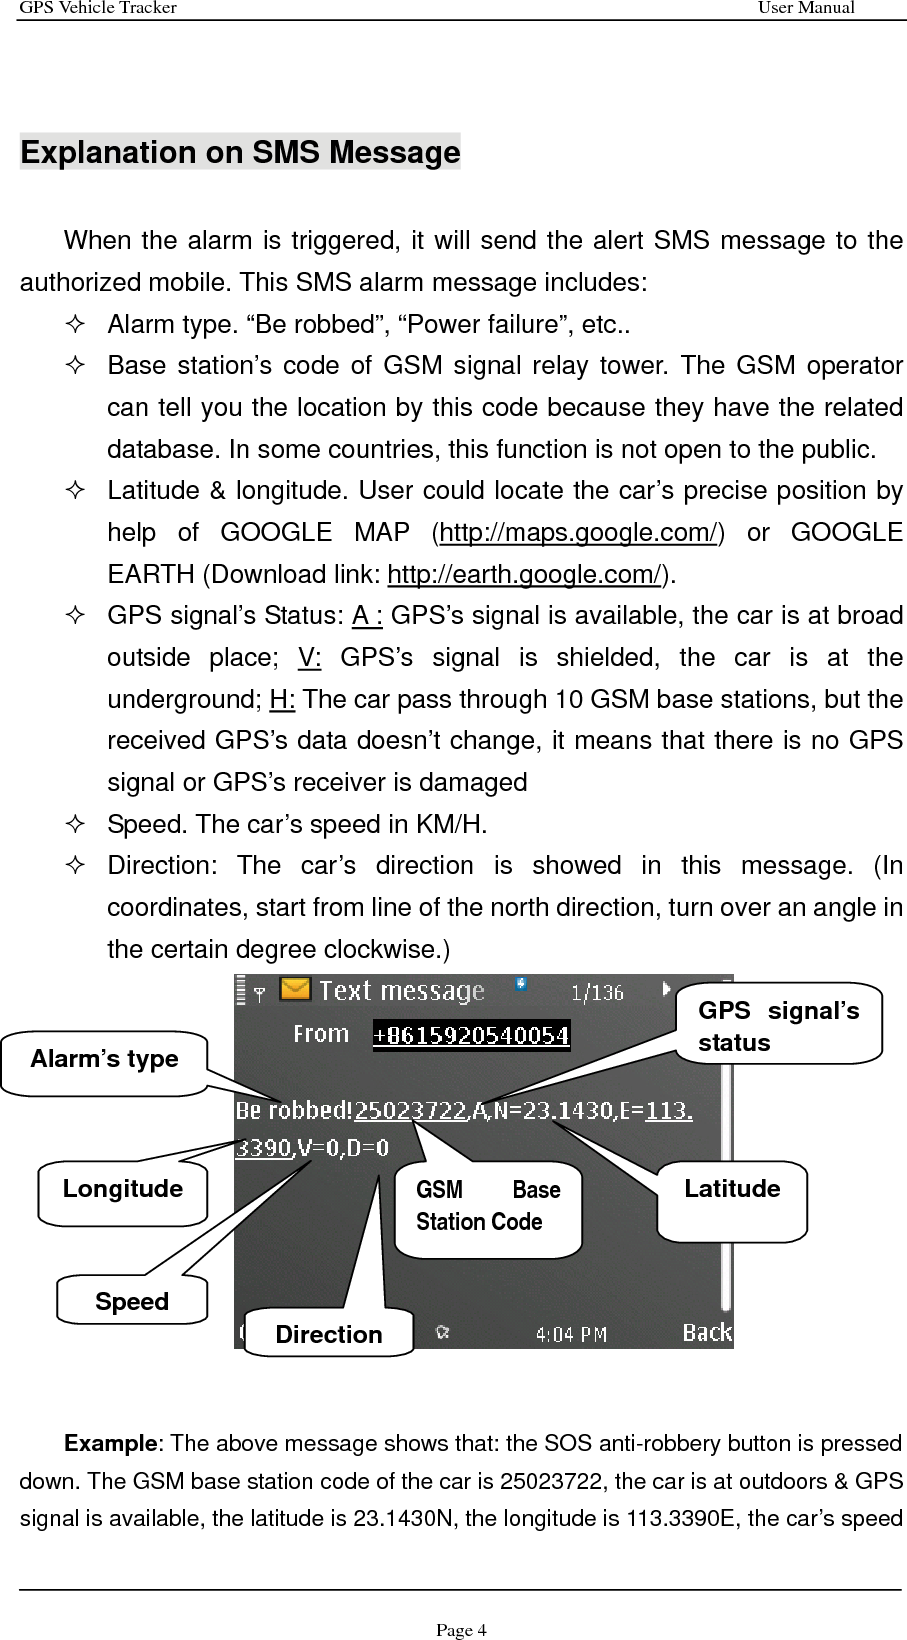 GPS Vehicle Tracker                                                              User Manual Page 4   Explanation on SMS Message  When the alarm is triggered, it will send the alert SMS message to the authorized mobile. This SMS alarm message includes:     Alarm type. “Be robbed”, “Power failure”, etc..   Base station’s code of GSM signal relay tower. The GSM operator can tell you the location by this code because they have the related database. In some countries, this function is not open to the public.   Latitude &amp; longitude. User could locate the car’s precise position by help of GOOGLE MAP (http://maps.google.com/) or GOOGLE EARTH (Download link: http://earth.google.com/).    GPS signal’s Status: A : GPS’s signal is available, the car is at broad outside place; V: GPS’s signal is shielded, the car is at the underground; H: The car pass through 10 GSM base stations, but the received GPS’s data doesn’t change, it means that there is no GPS signal or GPS’s receiver is damaged   Speed. The car’s speed in KM/H.    Direction: The car’s direction is showed in this message. (In coordinates, start from line of the north direction, turn over an angle in the certain degree clockwise.)    Example: The above message shows that: the SOS anti-robbery button is pressed down. The GSM base station code of the car is 25023722, the car is at outdoors &amp; GPS signal is available, the latitude is 23.1430N, the longitude is 113.3390E, the car’s speed Alarm’s type GSM Base Station Code  Latitude DirectionSpeed Longitude GPS signal’s status 